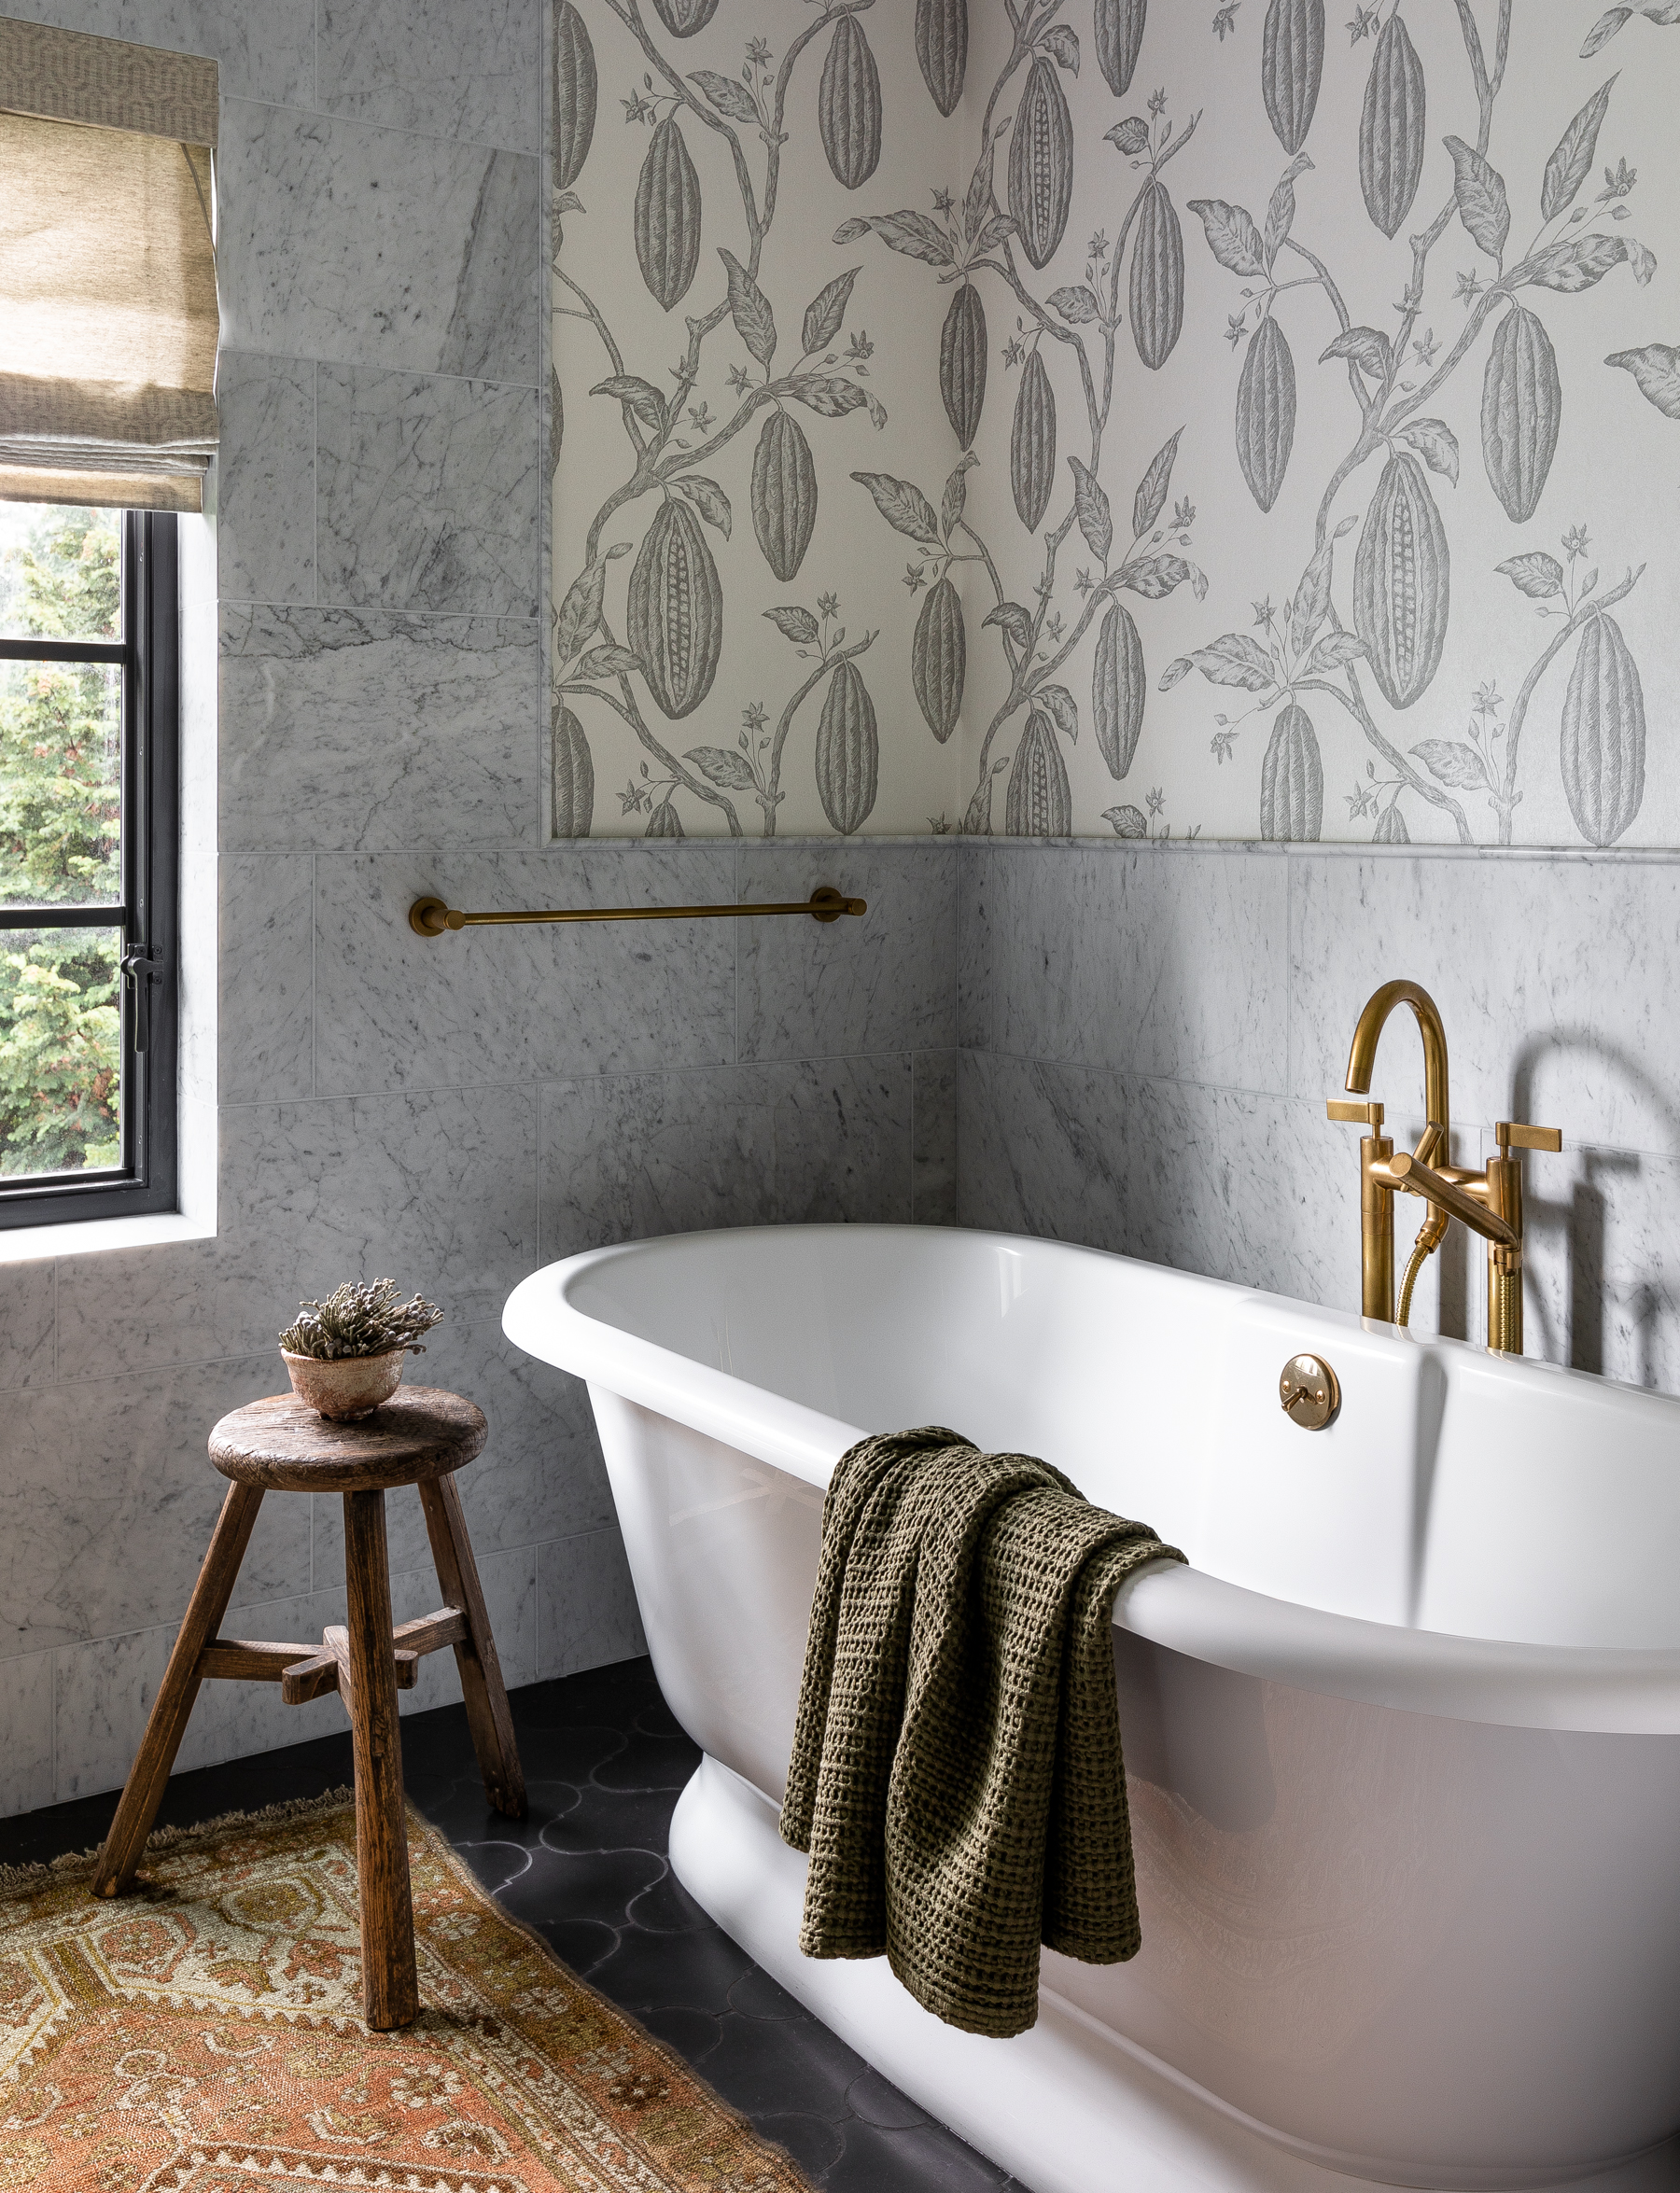 The bathtub lies in a quiet corner of this tranquil space, offering views out the window for a relaxing soak. The intricate botanical wall covering above the marble wainscoting adds to the serene ambiance.